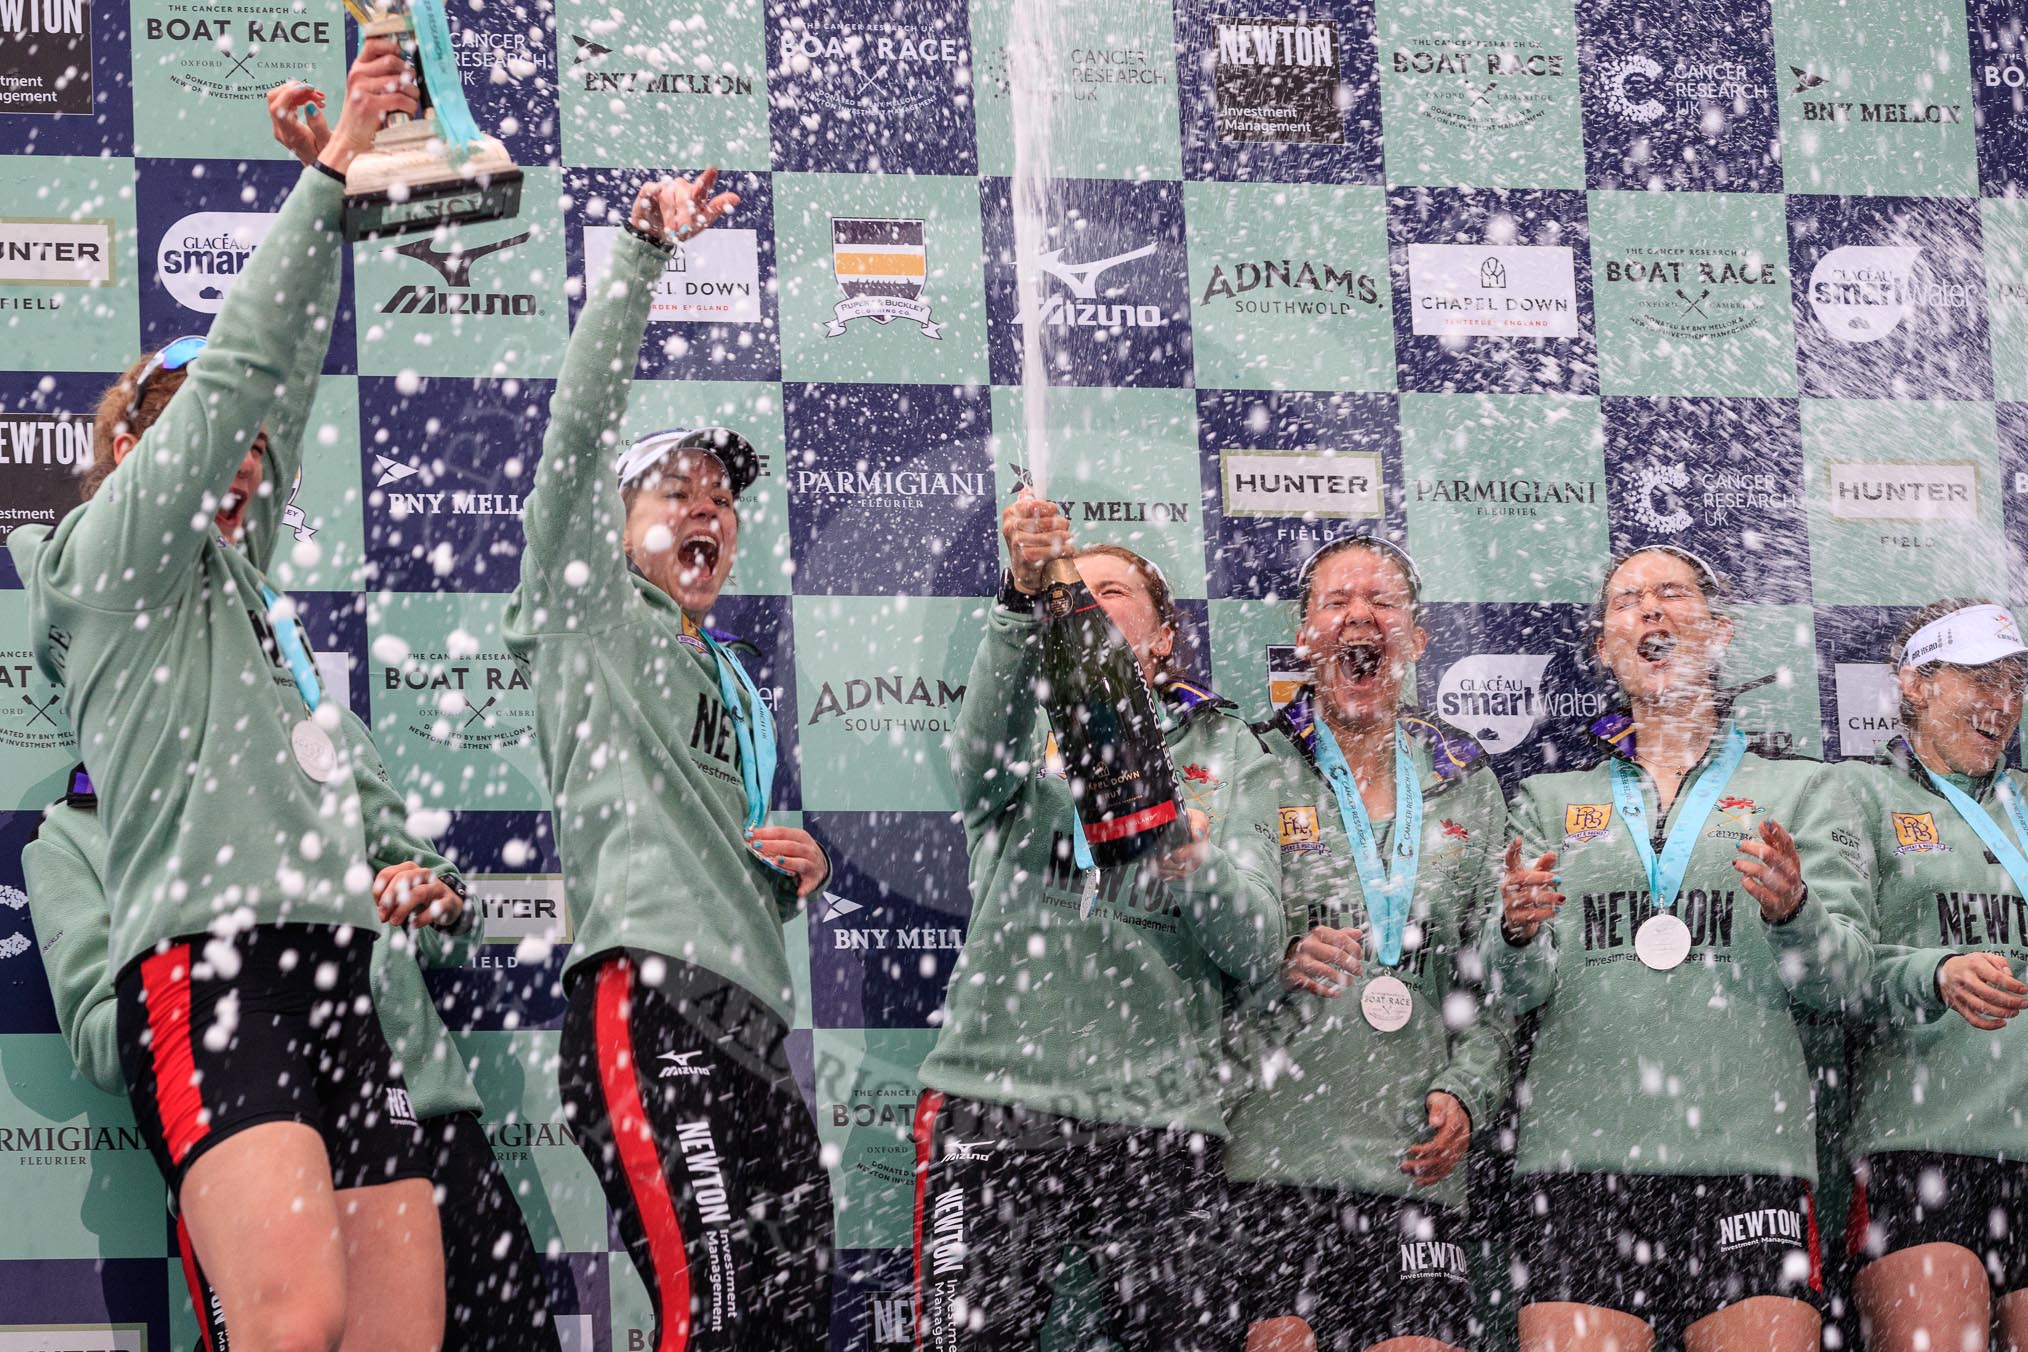 The Cancer Research UK Women's Boat Race 2018: Cambridge celebrations, with lots of champagne (actually Chapel Down Brut) on the podium, after winning the Women's Boat Race.
River Thames between Putney Bridge and Mortlake,
London SW15,

United Kingdom,
on 24 March 2018 at 17:09, image #278